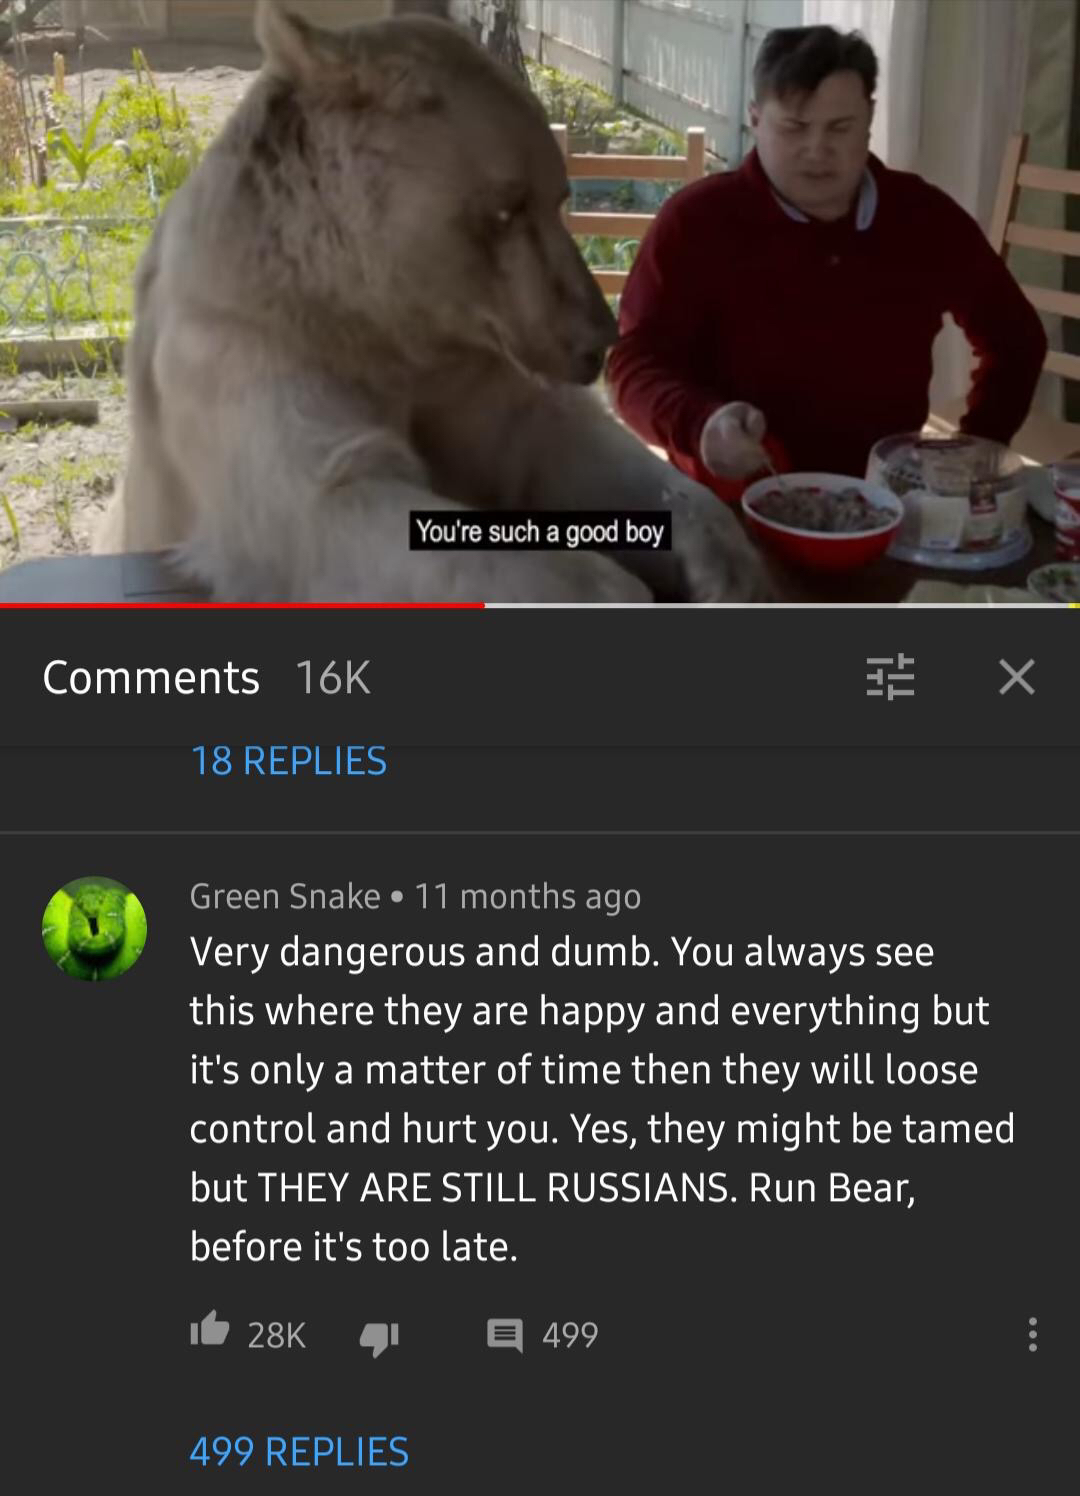 You're such a good boy - The Bears, Russians, Training, Screenshot, Comments, Danger, Translation, Medved Stepan